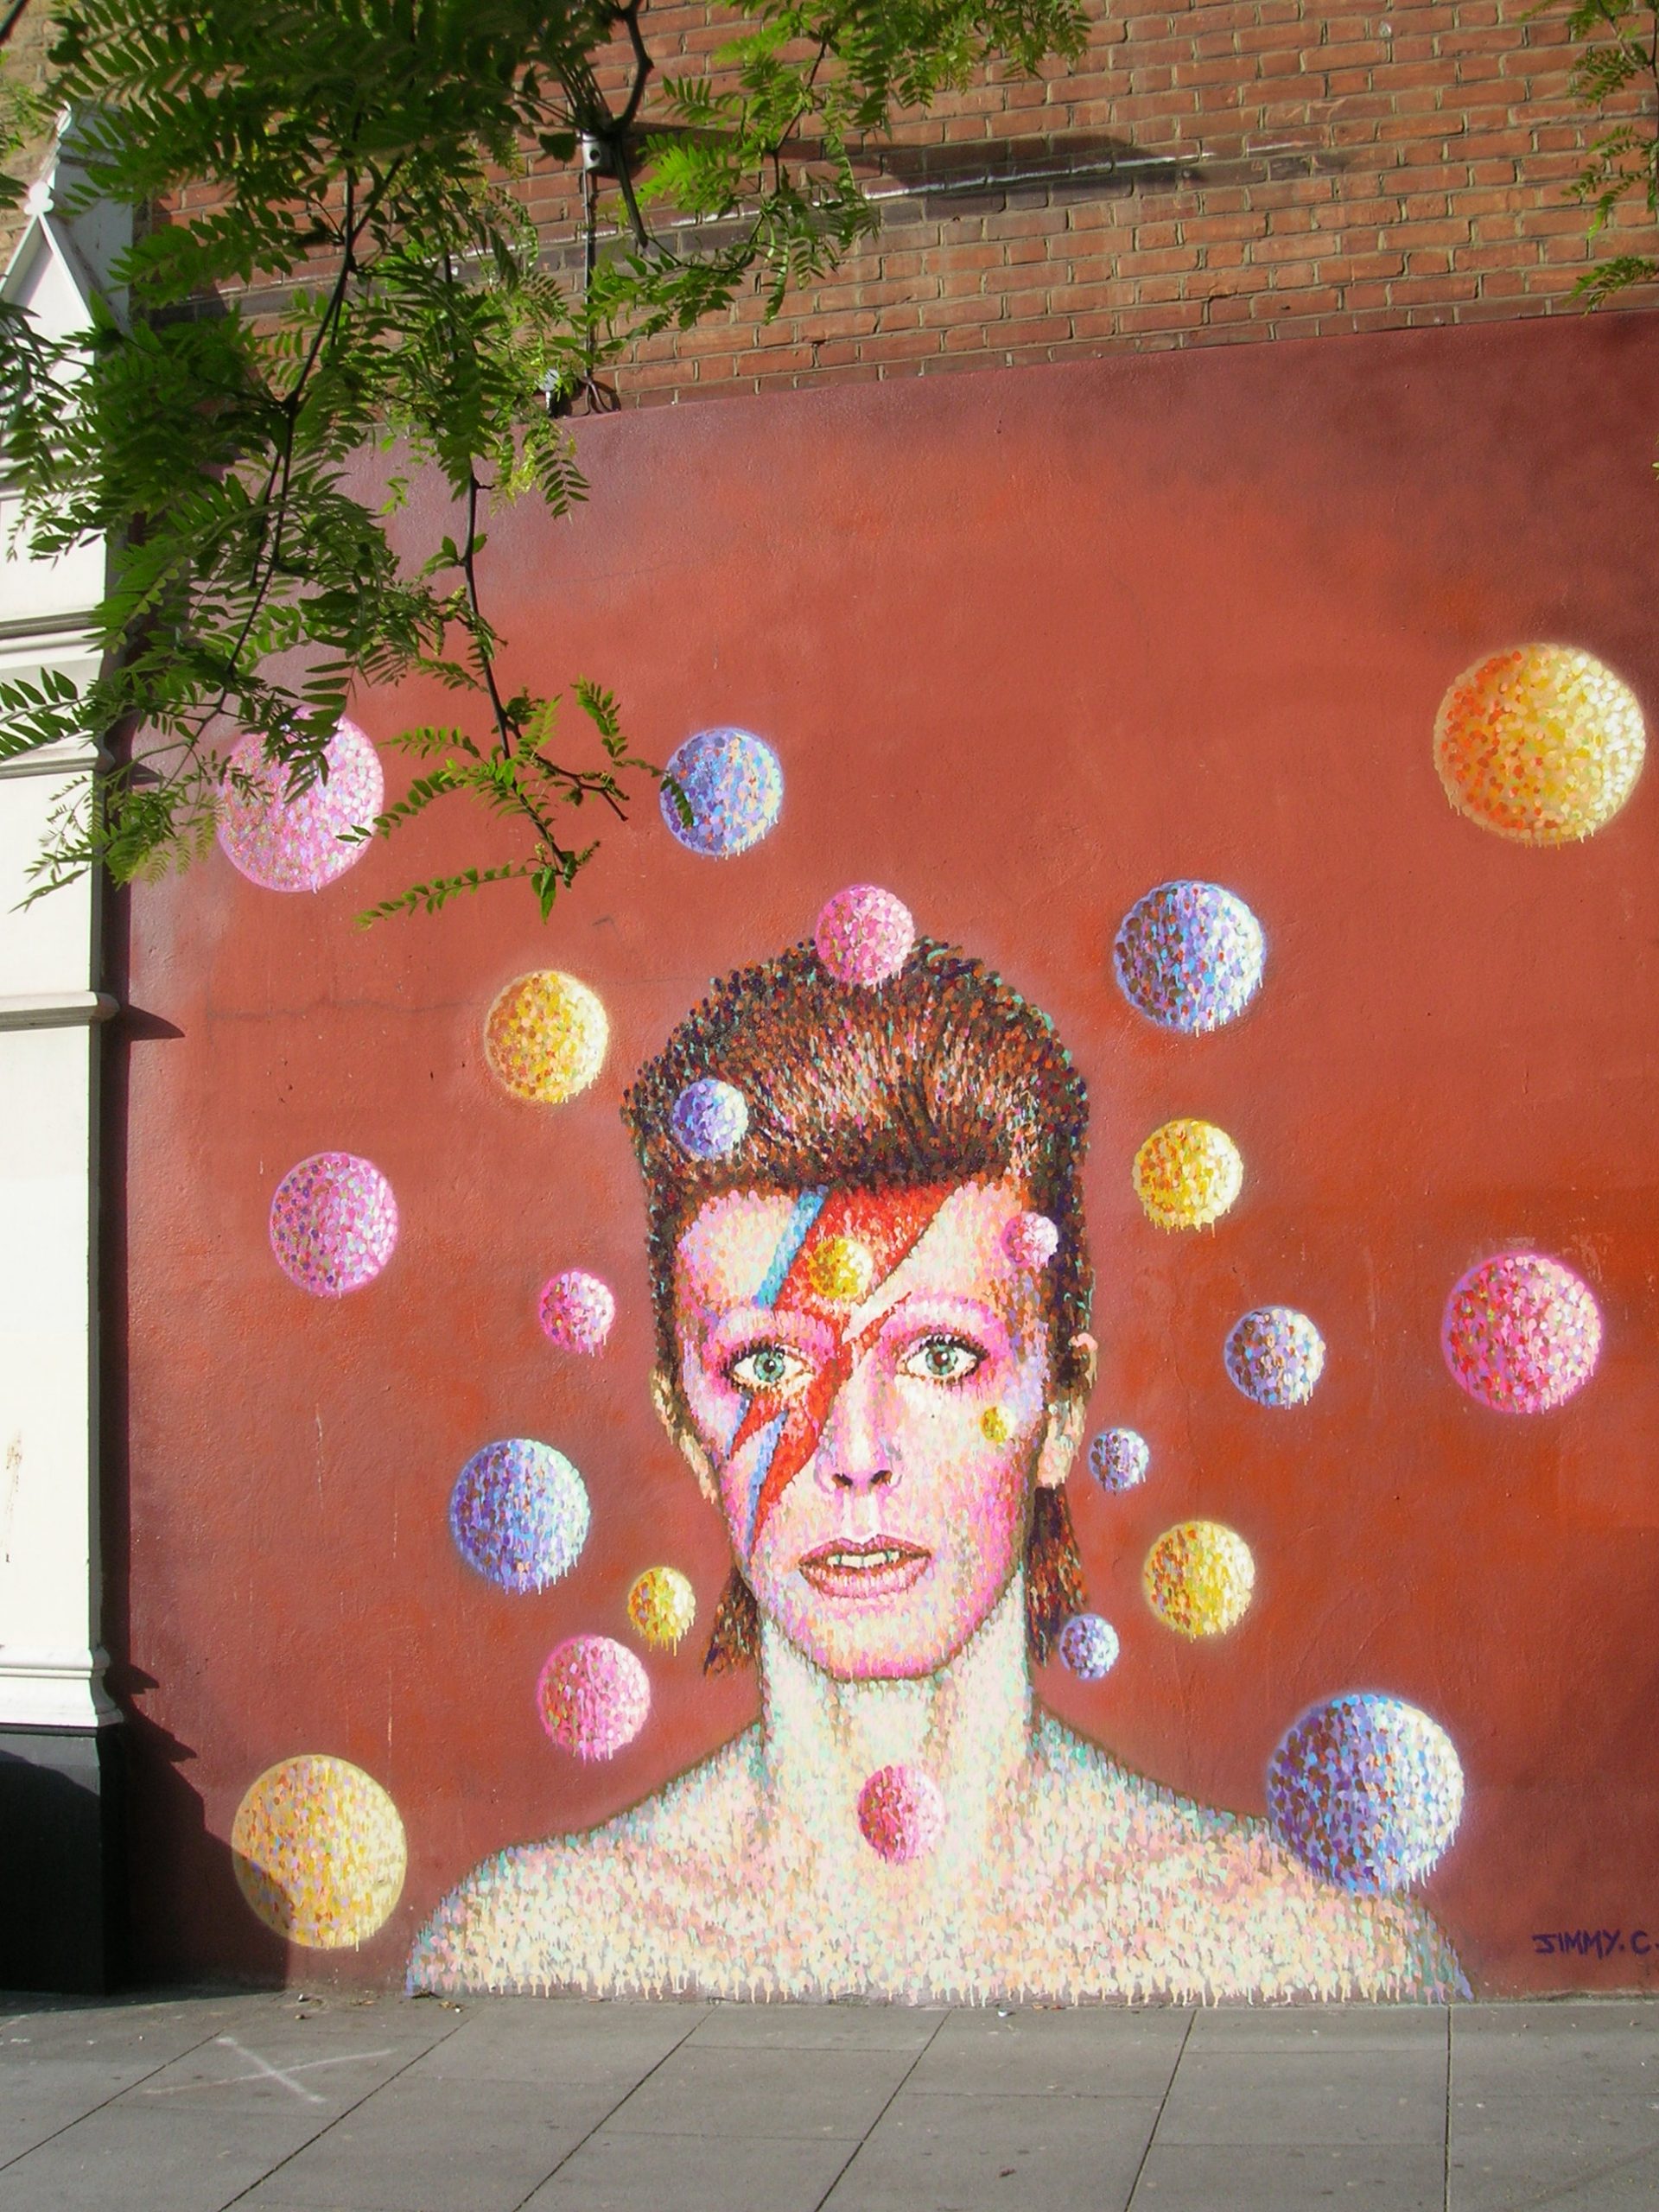 David Bowie Mural in Brixton by Ian Thirkettle